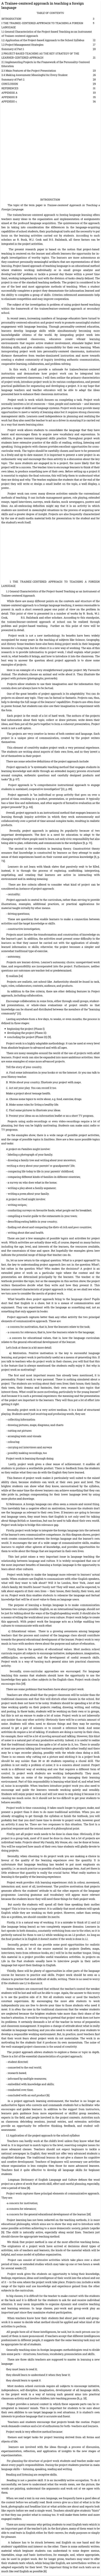 A Trainee-centered approach in teaching a foreign language